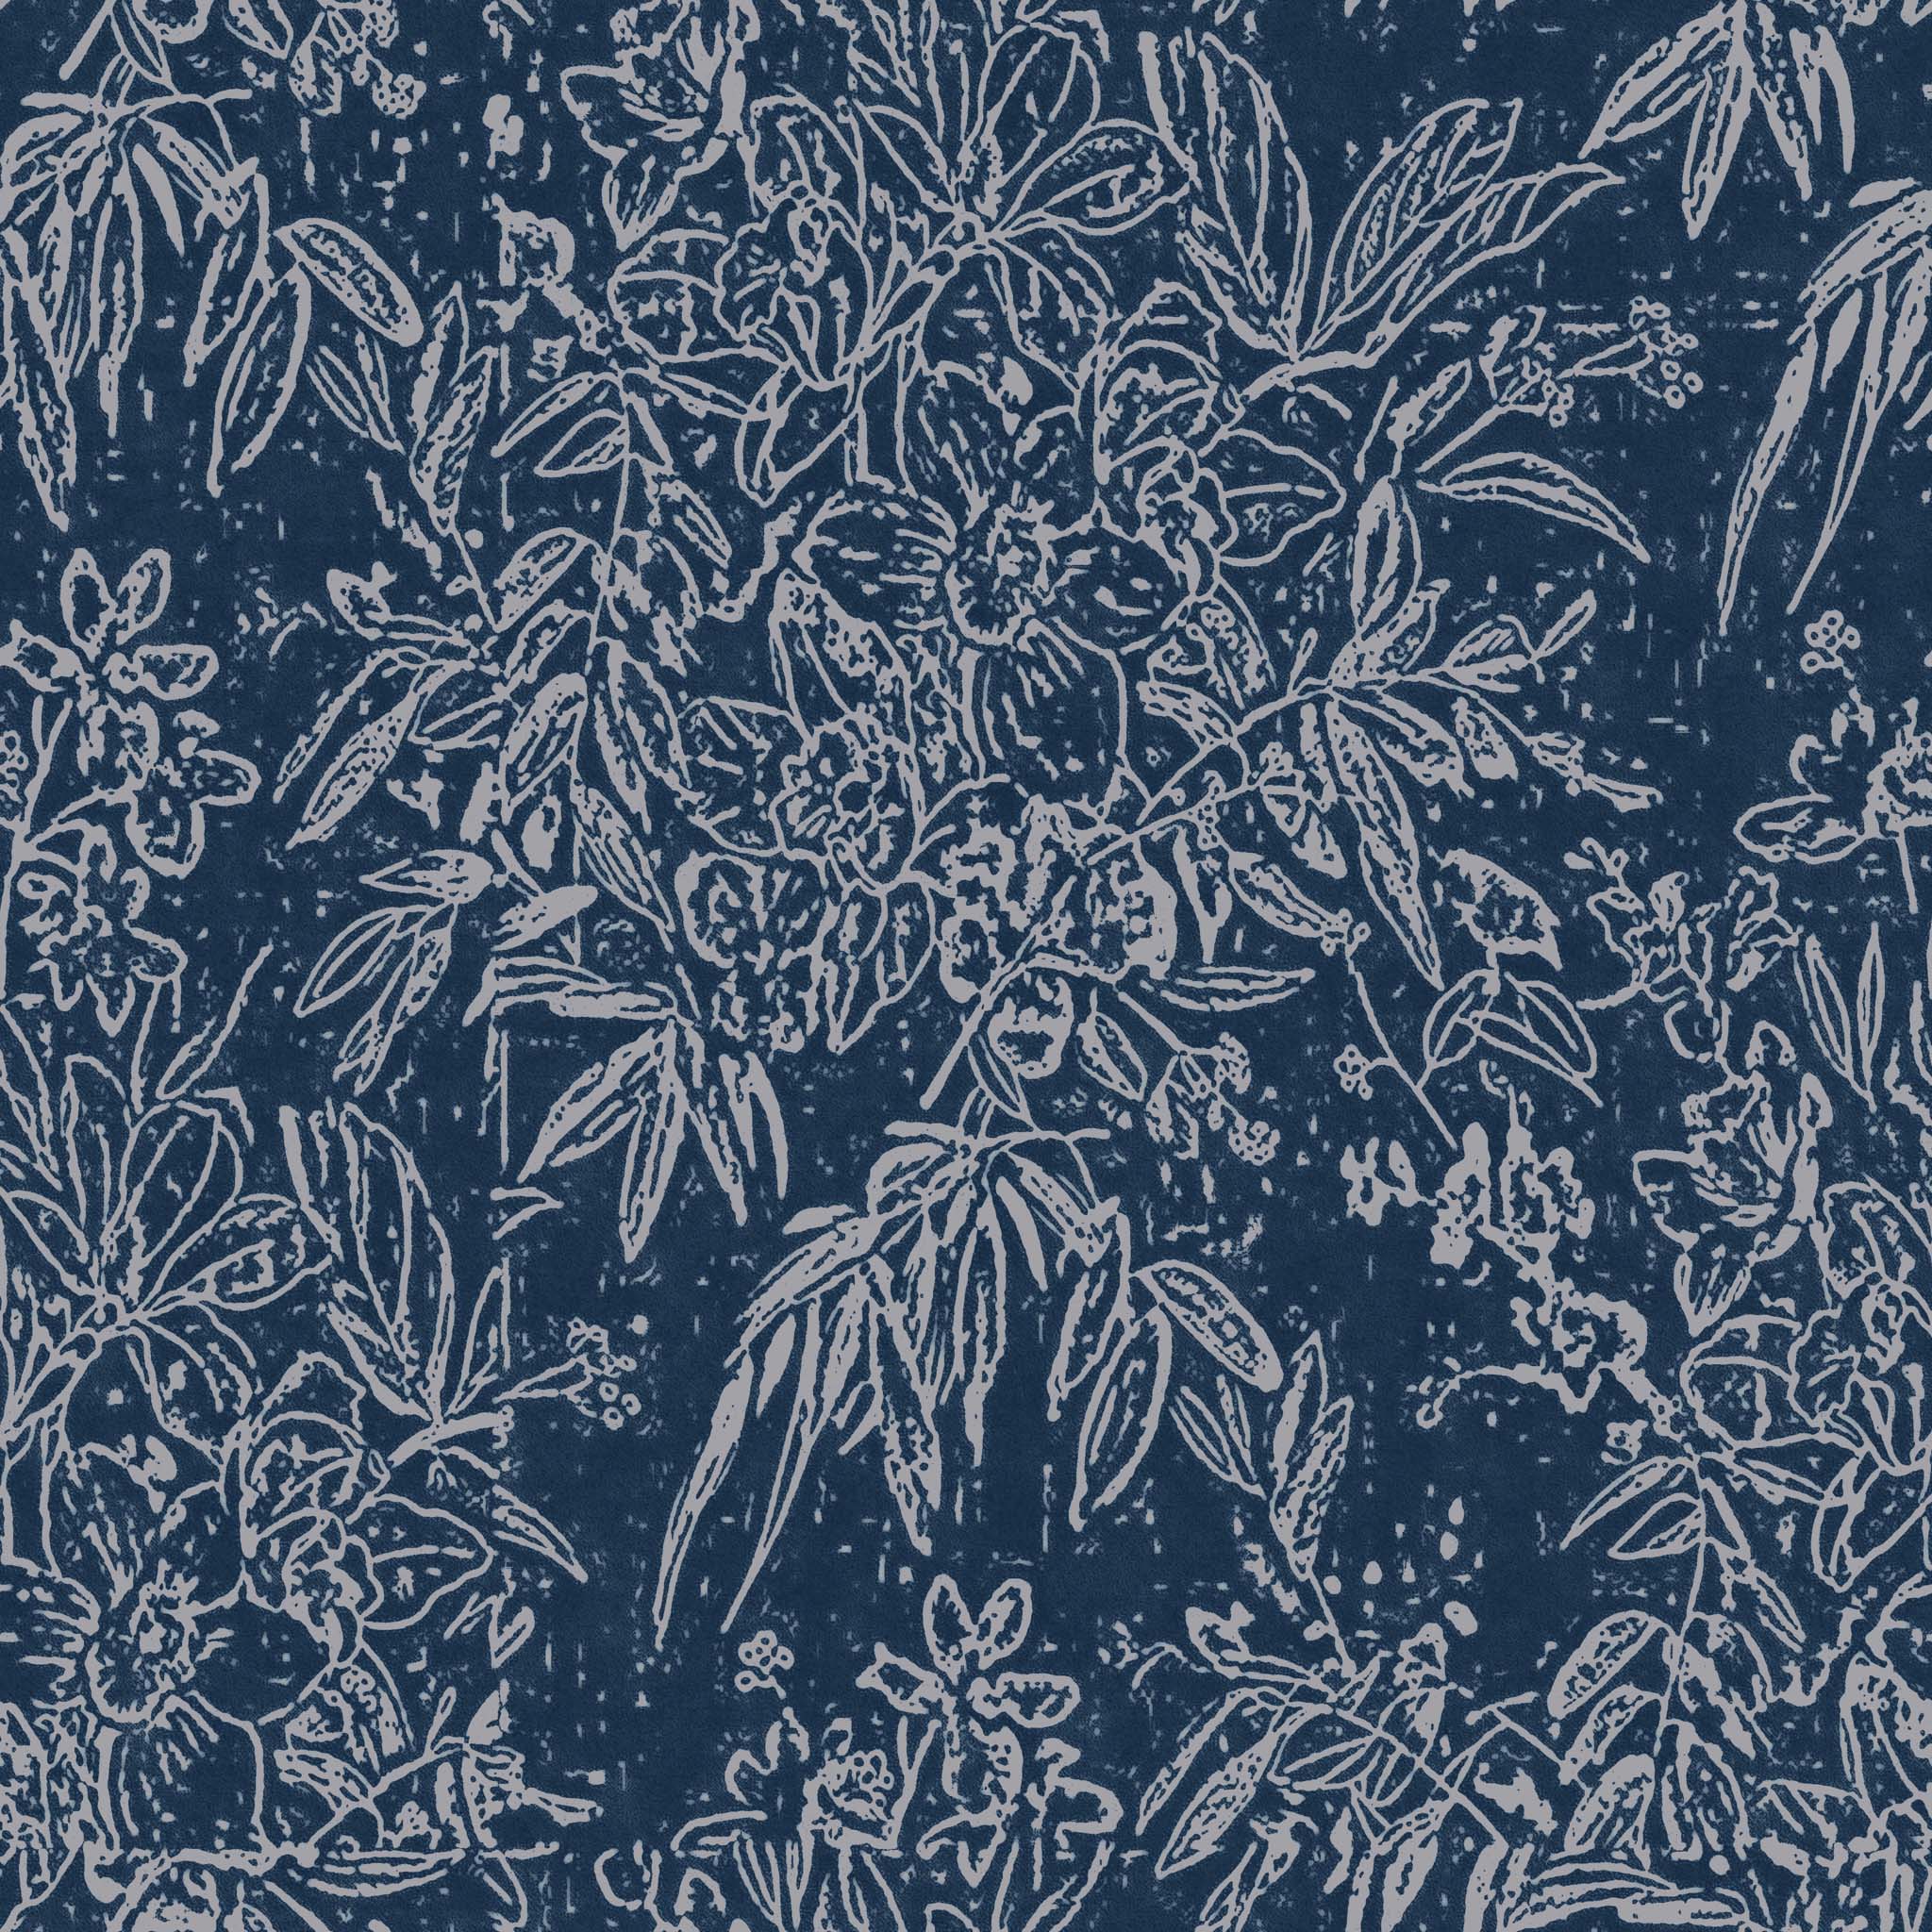 images/productimages/small/cherry-orchard-indigo-52x52cm-wp30008-wallpaper.jpg